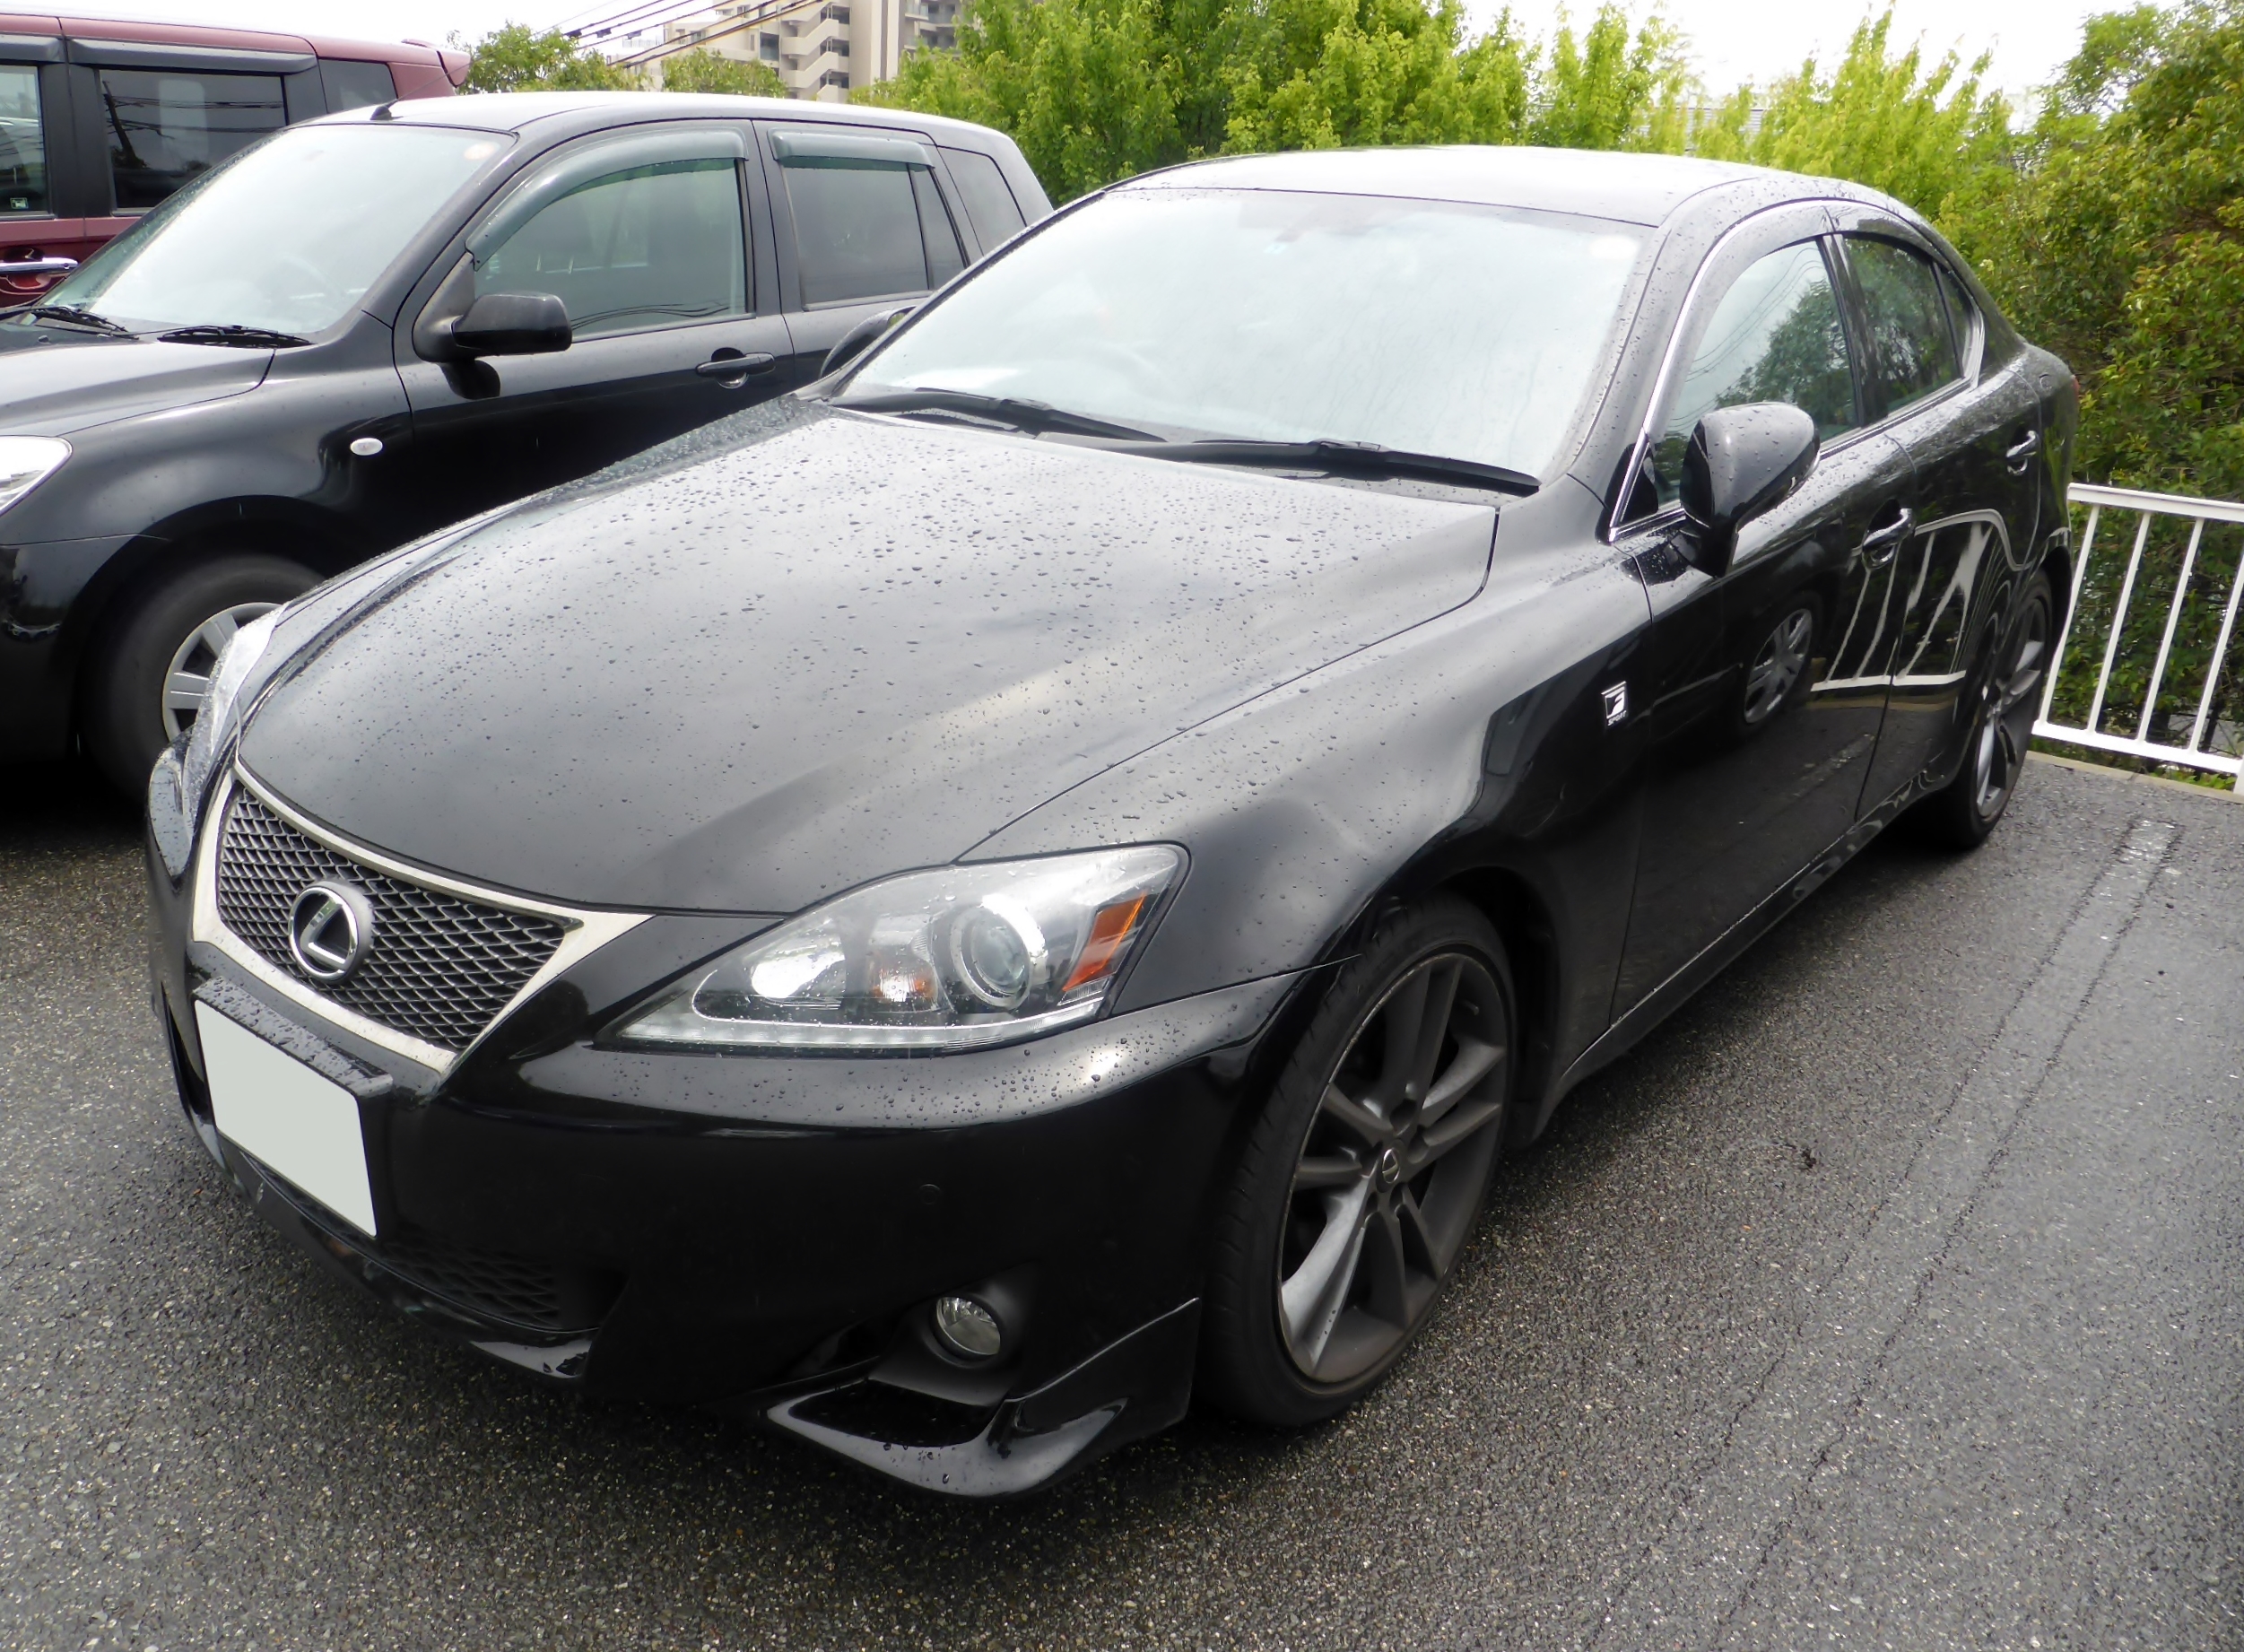 File The Frontview Of Lexus Is350 F Sport Gse21 Jpg Wikimedia Commons